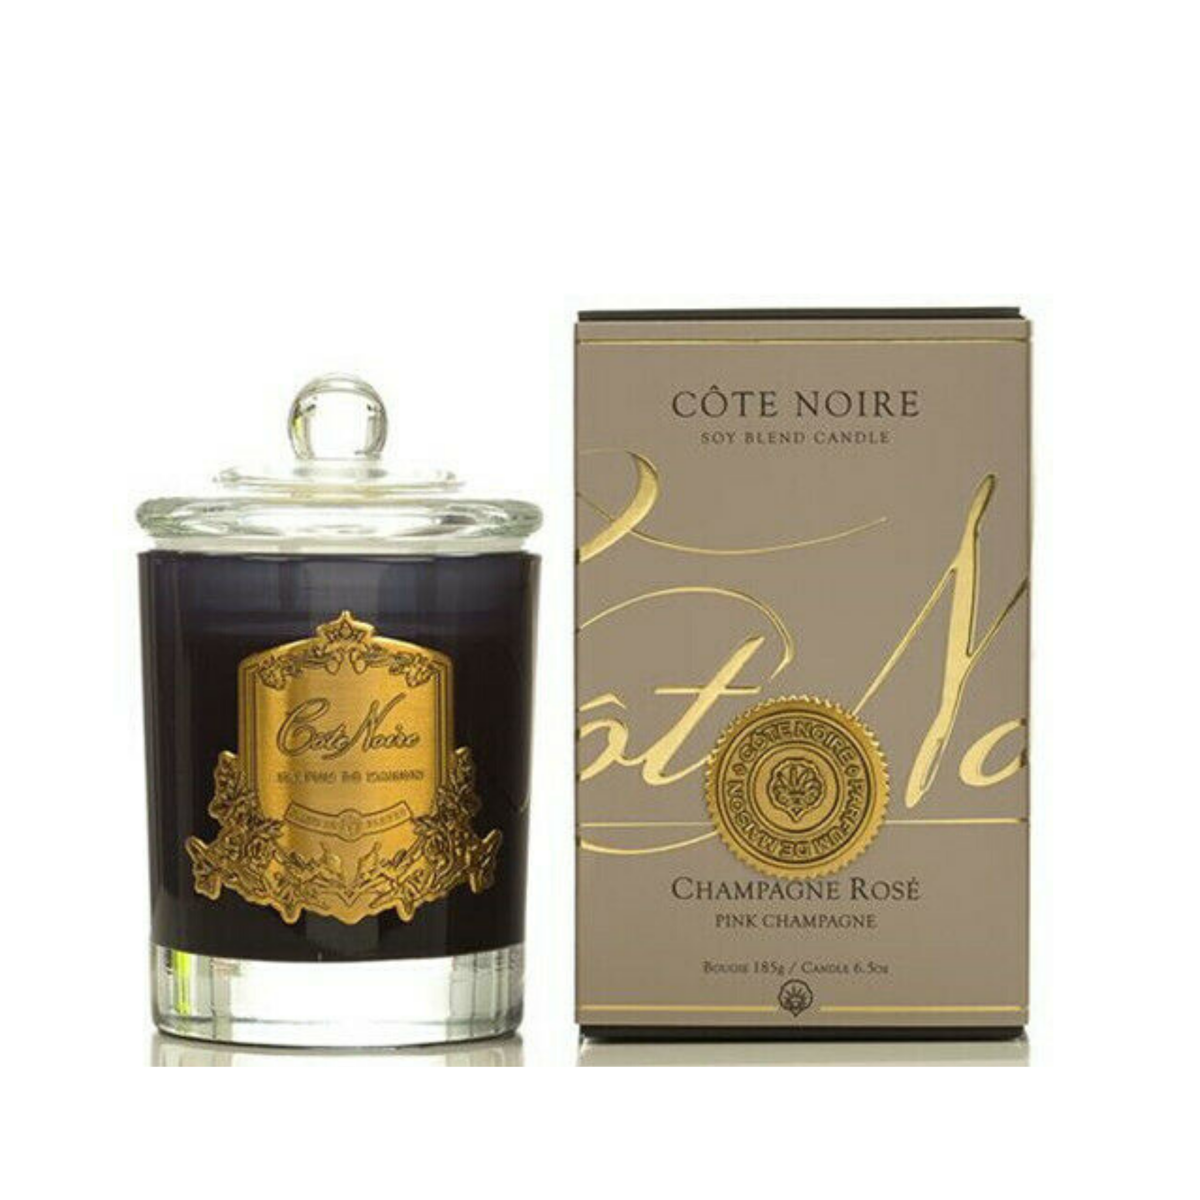 CHAMPAGNE ROSE - PINK CHAMPAGNE CANDLE - COTE NOIRE